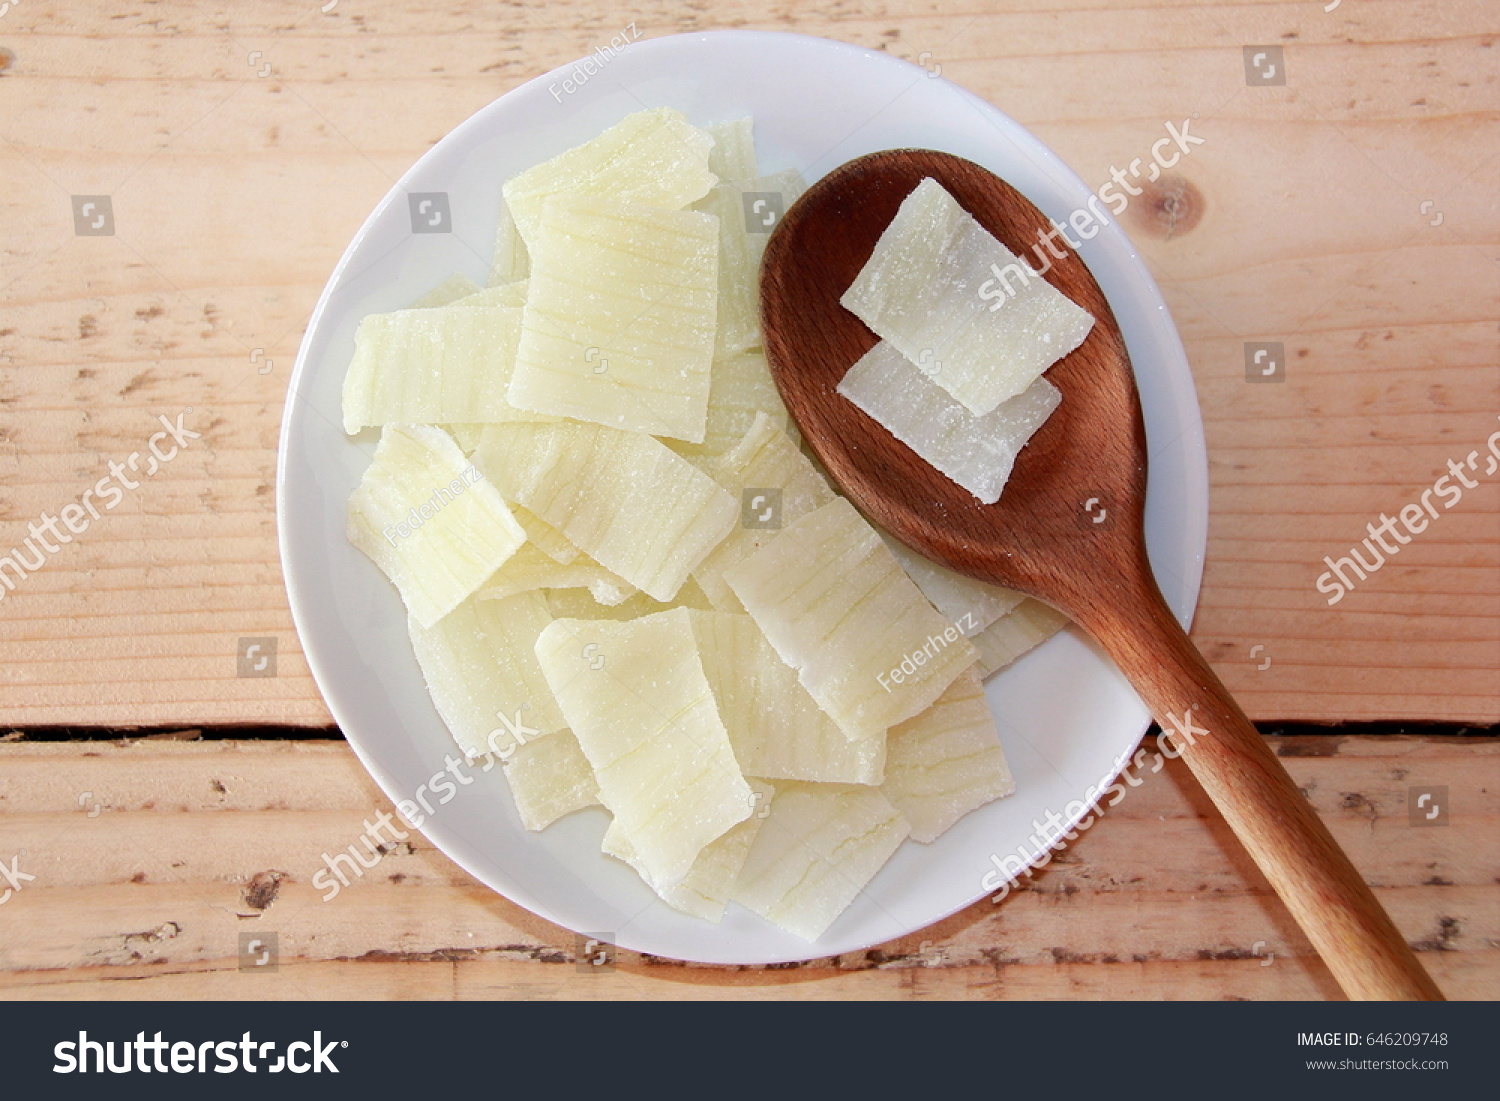 Sliced Aloe Vera on a white plate with a wooden spoon #646209748